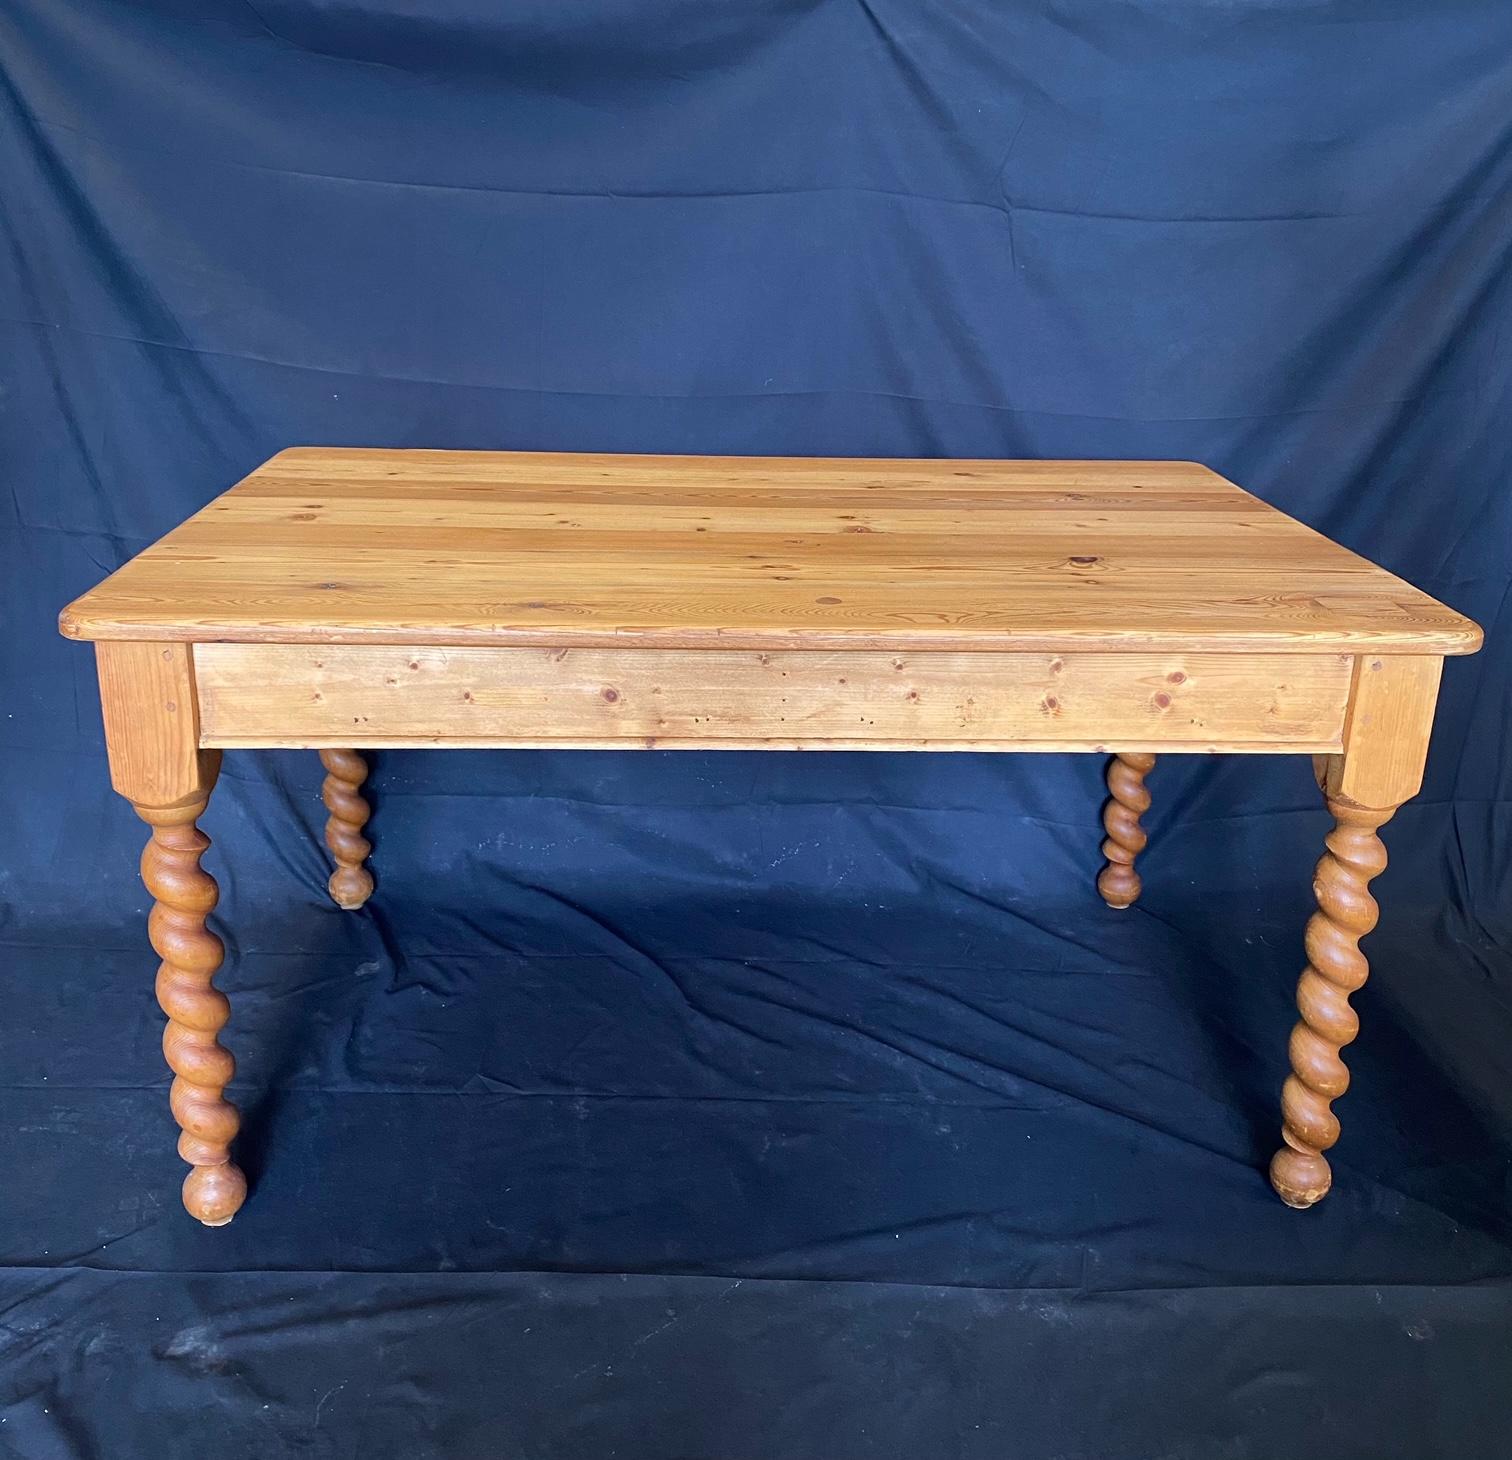 Antique country British farmhouse dining table or kitchen island hand crafted from pine planks on the top with tongue and groove joinery and two drawers on one side. The wonderful and rare thick turned barley twist legs have wood peg joinery. The